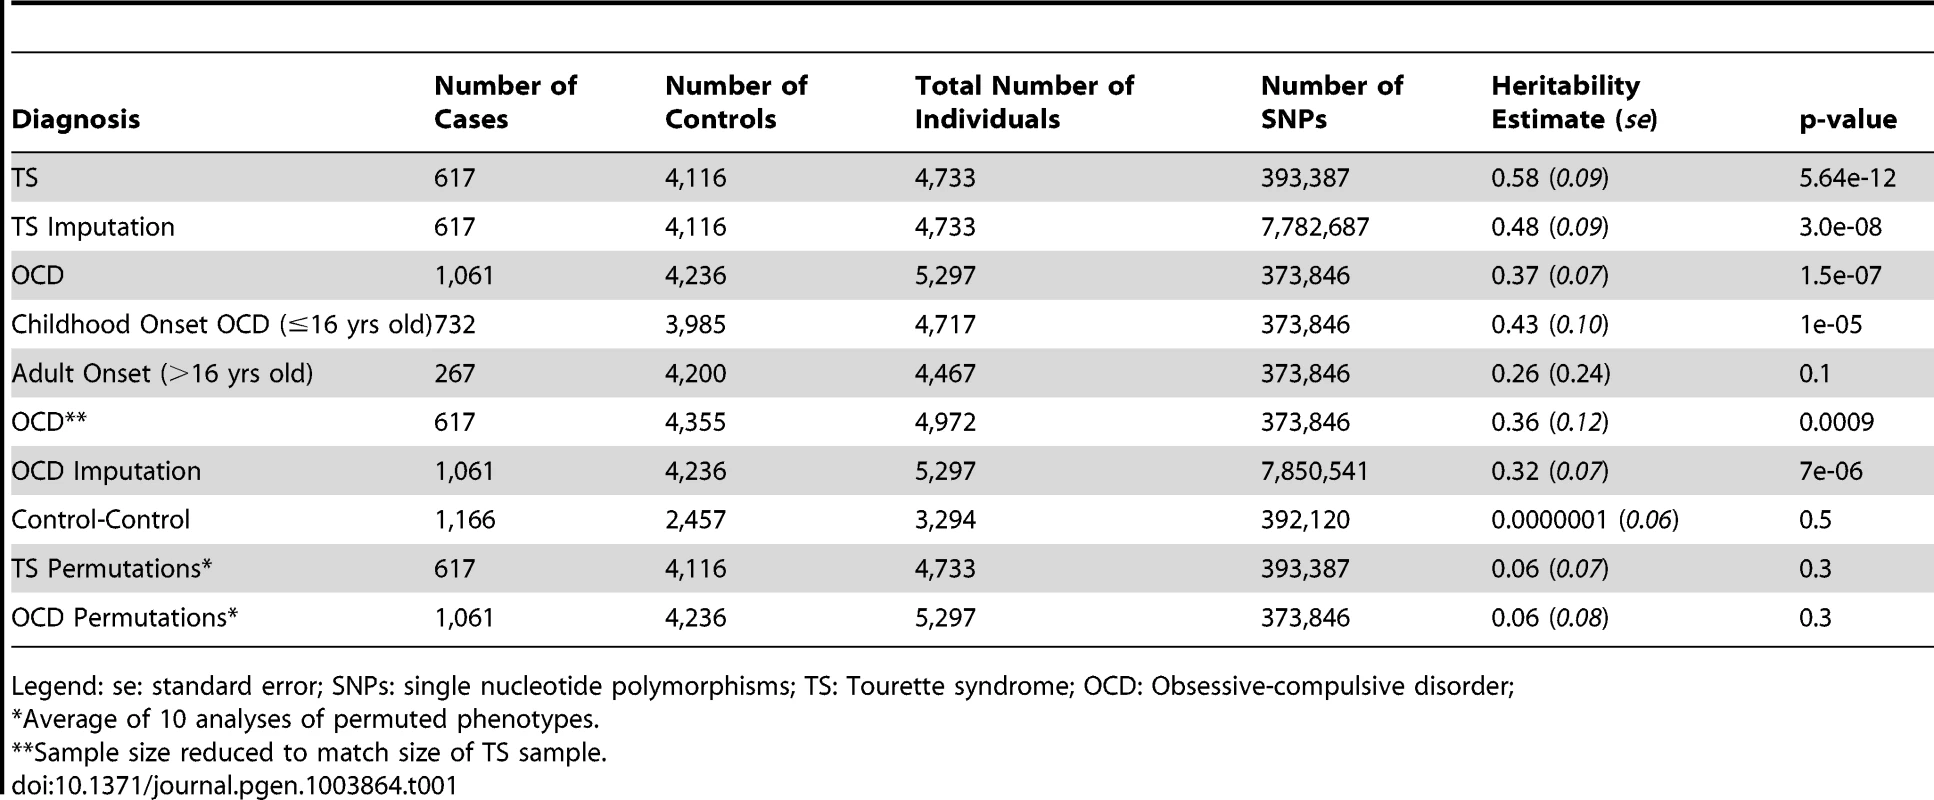 Overall heritability analysis of obsessive-compulsive disorder and Tourette syndrome.